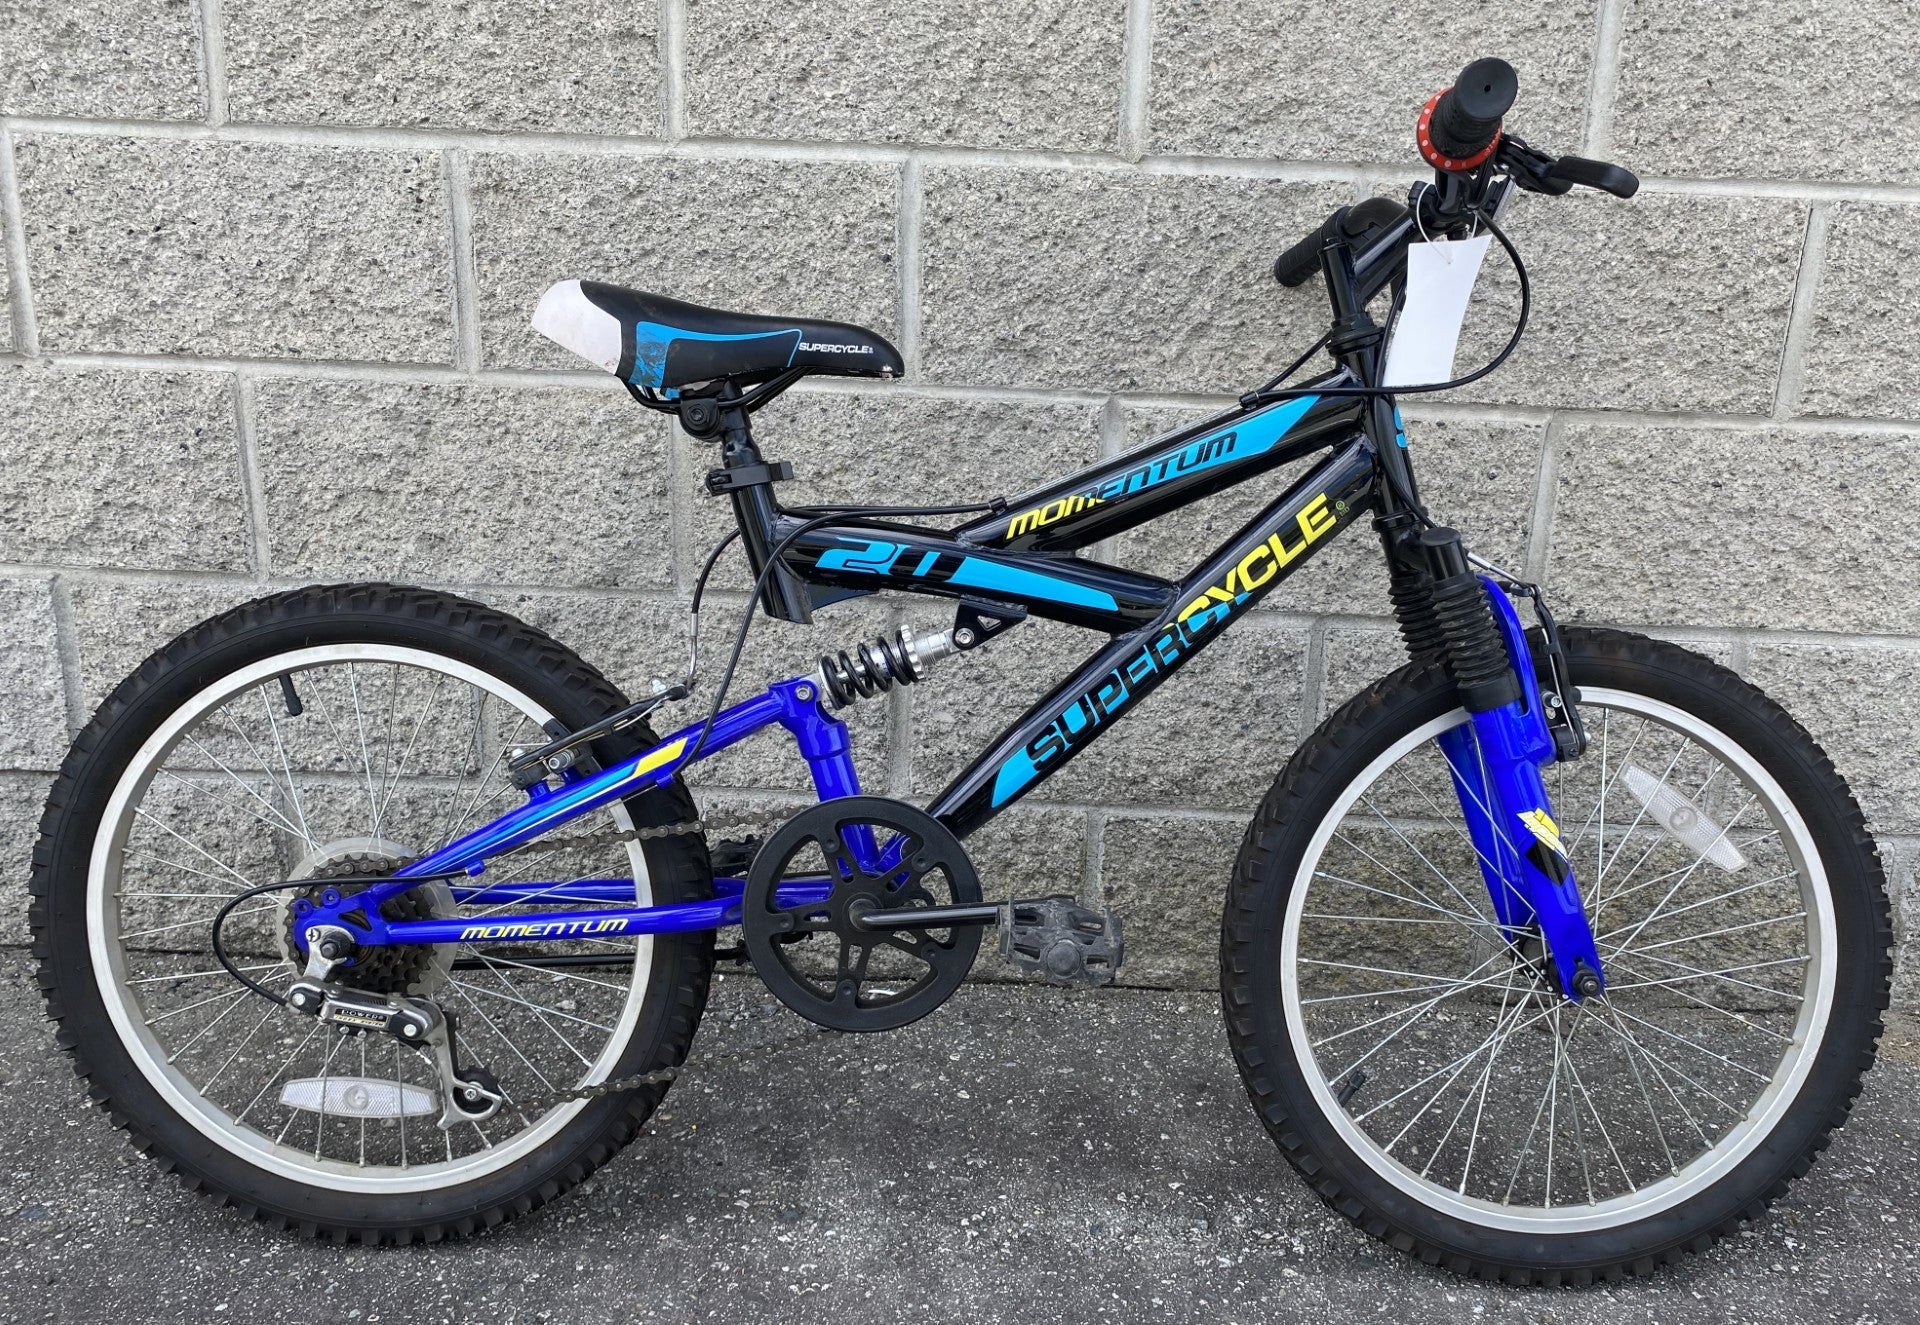 SUPERCYLE MOMENTUM MTN BIKE 20" BLK/BLU FULL SUSPENSION-Sports Replay - Sports Excellence-Sports Replay - Sports Excellence